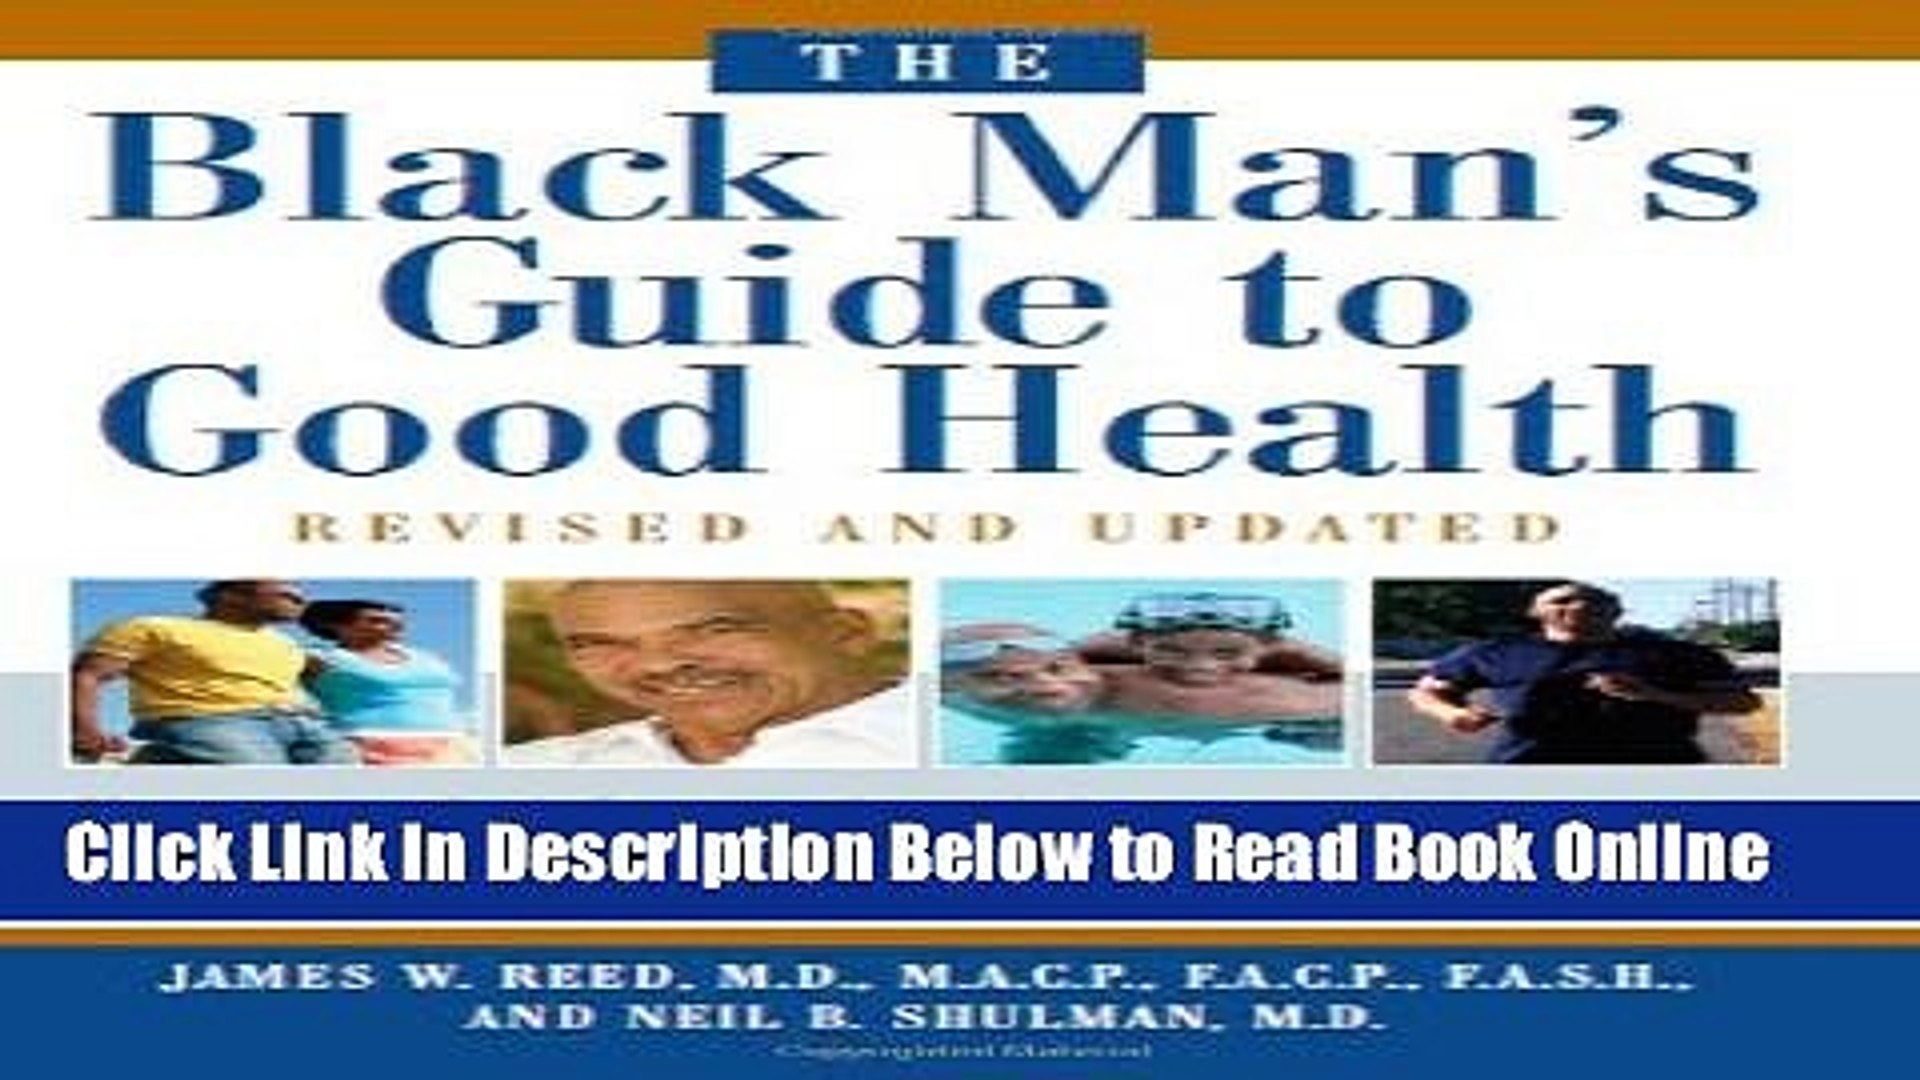 Read The Black Man s Guide to Good Health: Essential Advice for African-American Men and Their